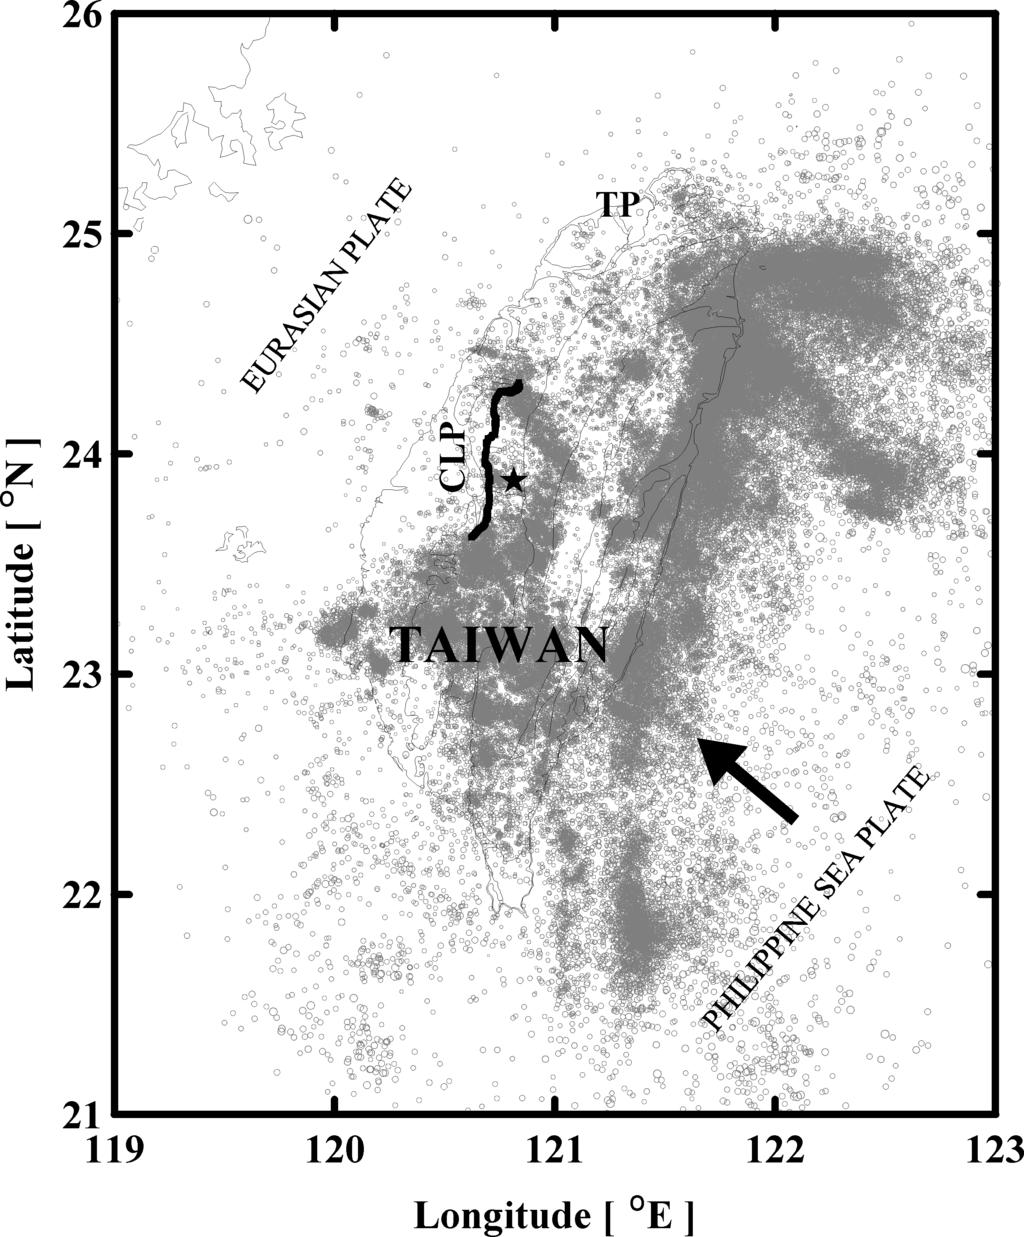 Seismic activation of the Chi-Chi earthquake F3 Figure 2. Map showing the epicentres of earthquakes used in this study (open circles) and the Chi-Chi main shock (star).